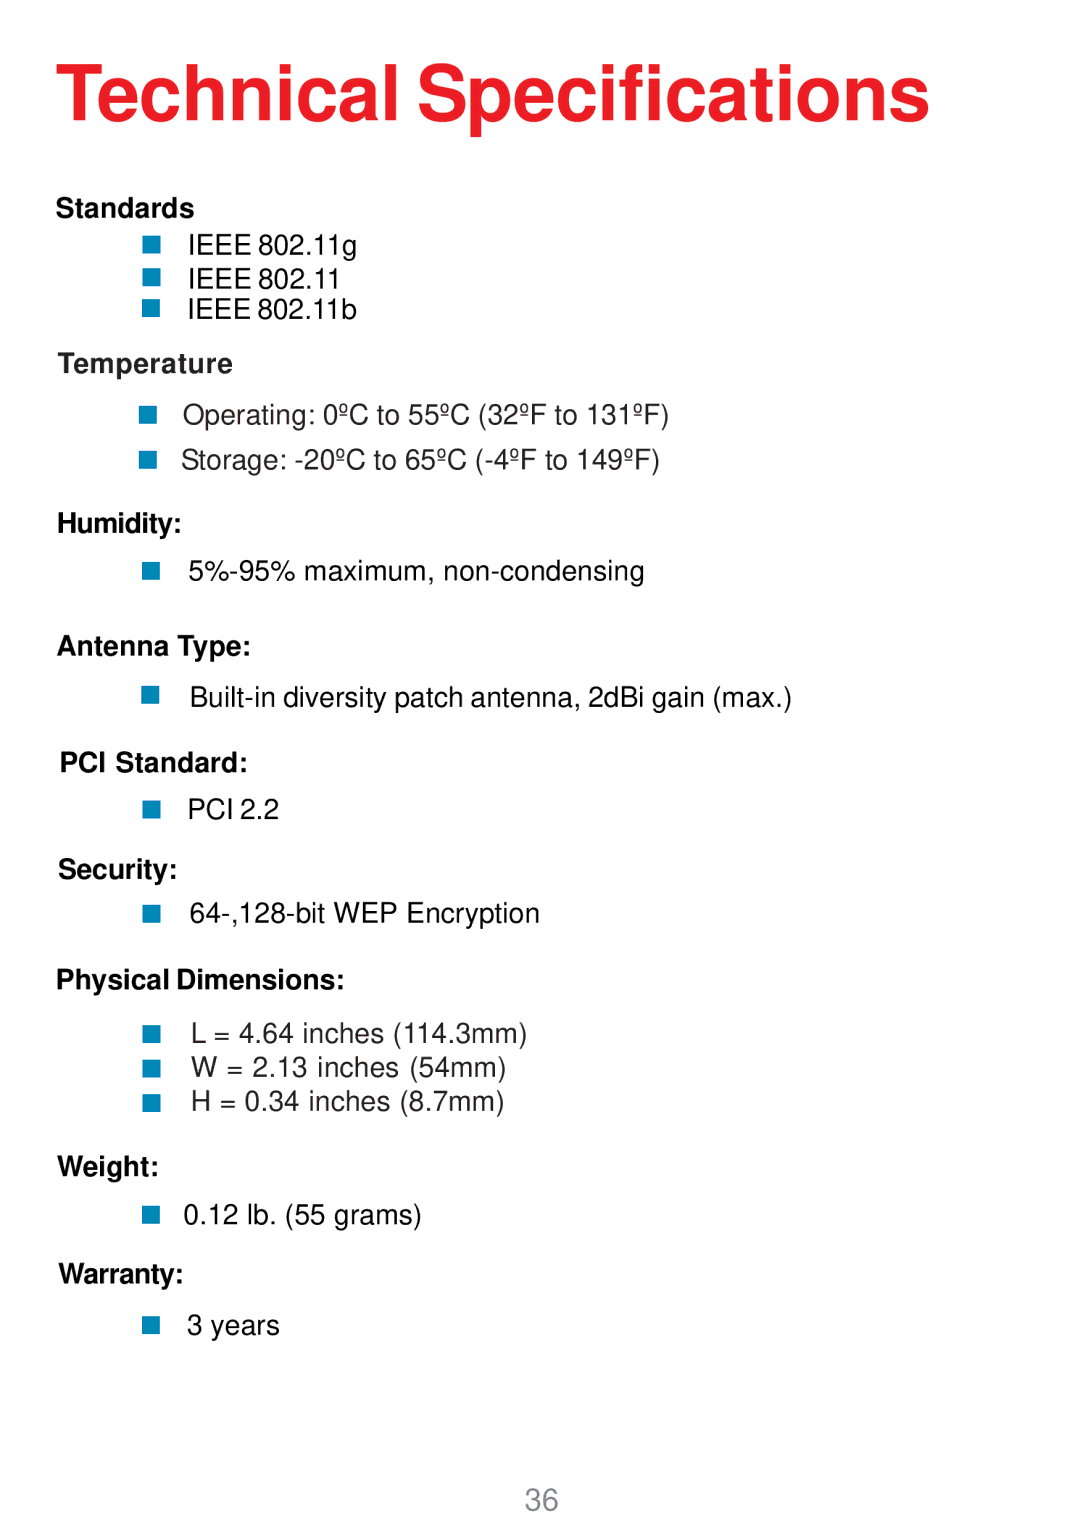 D-Link DWL-G510 manual Technical Specifications, Temperature 